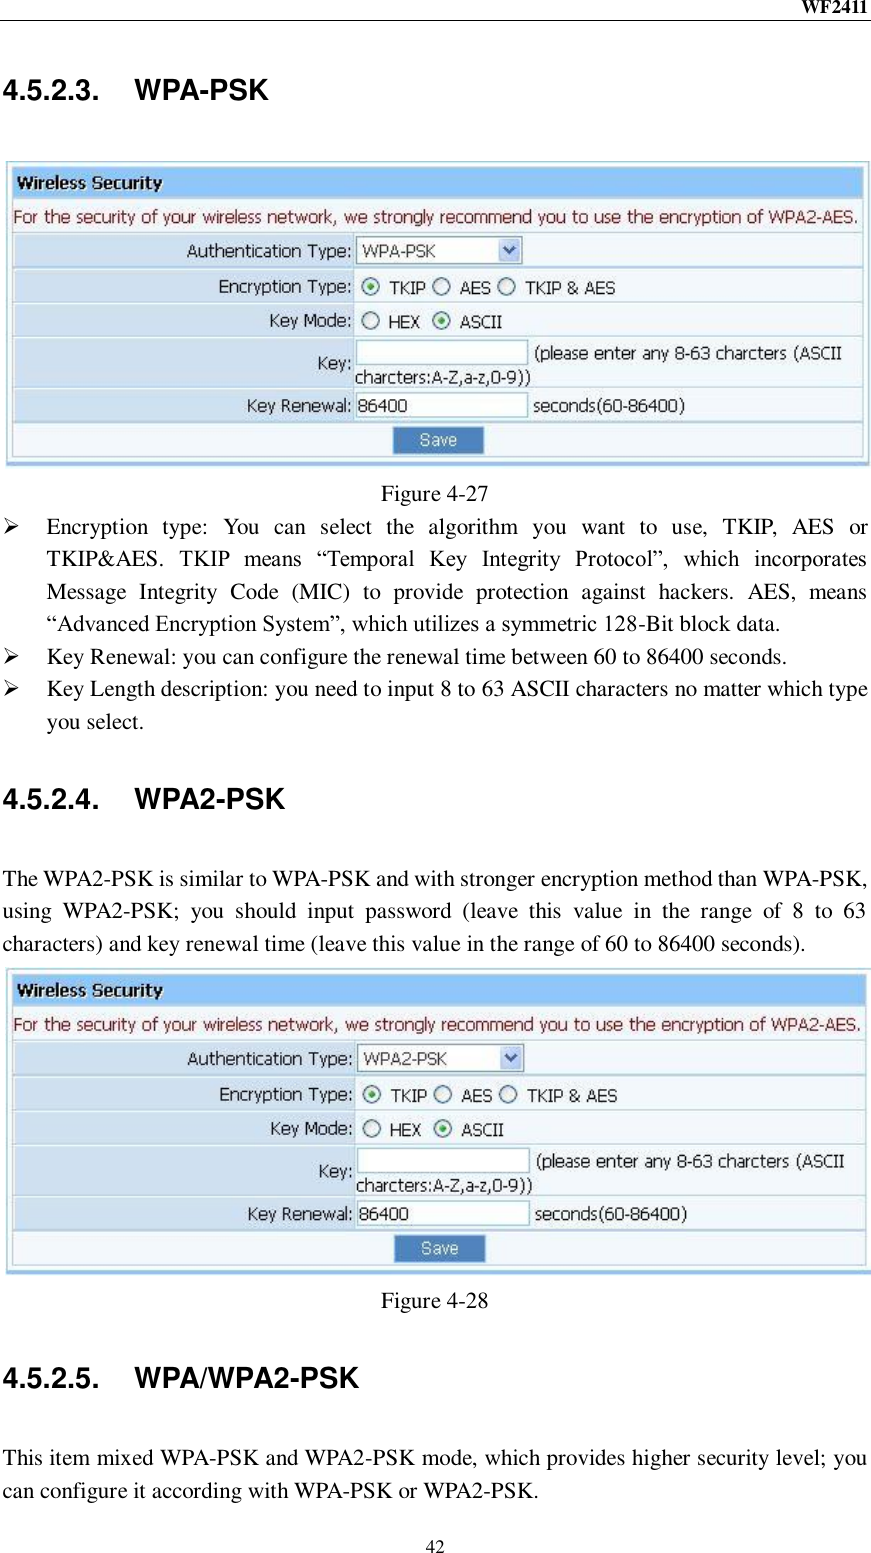 WF2411  42 4.5.2.3.  WPA-PSK  Figure 4-27  Encryption  type:  You  can  select  the  algorithm  you  want  to  use,  TKIP,  AES  or TKIP&amp;AES.  TKIP  means  “Temporal  Key  Integrity  Protocol”,  which  incorporates Message  Integrity  Code  (MIC)  to  provide  protection  against  hackers.  AES,  means “Advanced Encryption System”, which utilizes a symmetric 128-Bit block data.  Key Renewal: you can configure the renewal time between 60 to 86400 seconds.  Key Length description: you need to input 8 to 63 ASCII characters no matter which type you select. 4.5.2.4.  WPA2-PSK The WPA2-PSK is similar to WPA-PSK and with stronger encryption method than WPA-PSK, using  WPA2-PSK;  you  should  input  password  (leave  this  value  in  the  range  of  8  to  63 characters) and key renewal time (leave this value in the range of 60 to 86400 seconds).  Figure 4-28 4.5.2.5.  WPA/WPA2-PSK This item mixed WPA-PSK and WPA2-PSK mode, which provides higher security level; you can configure it according with WPA-PSK or WPA2-PSK. 